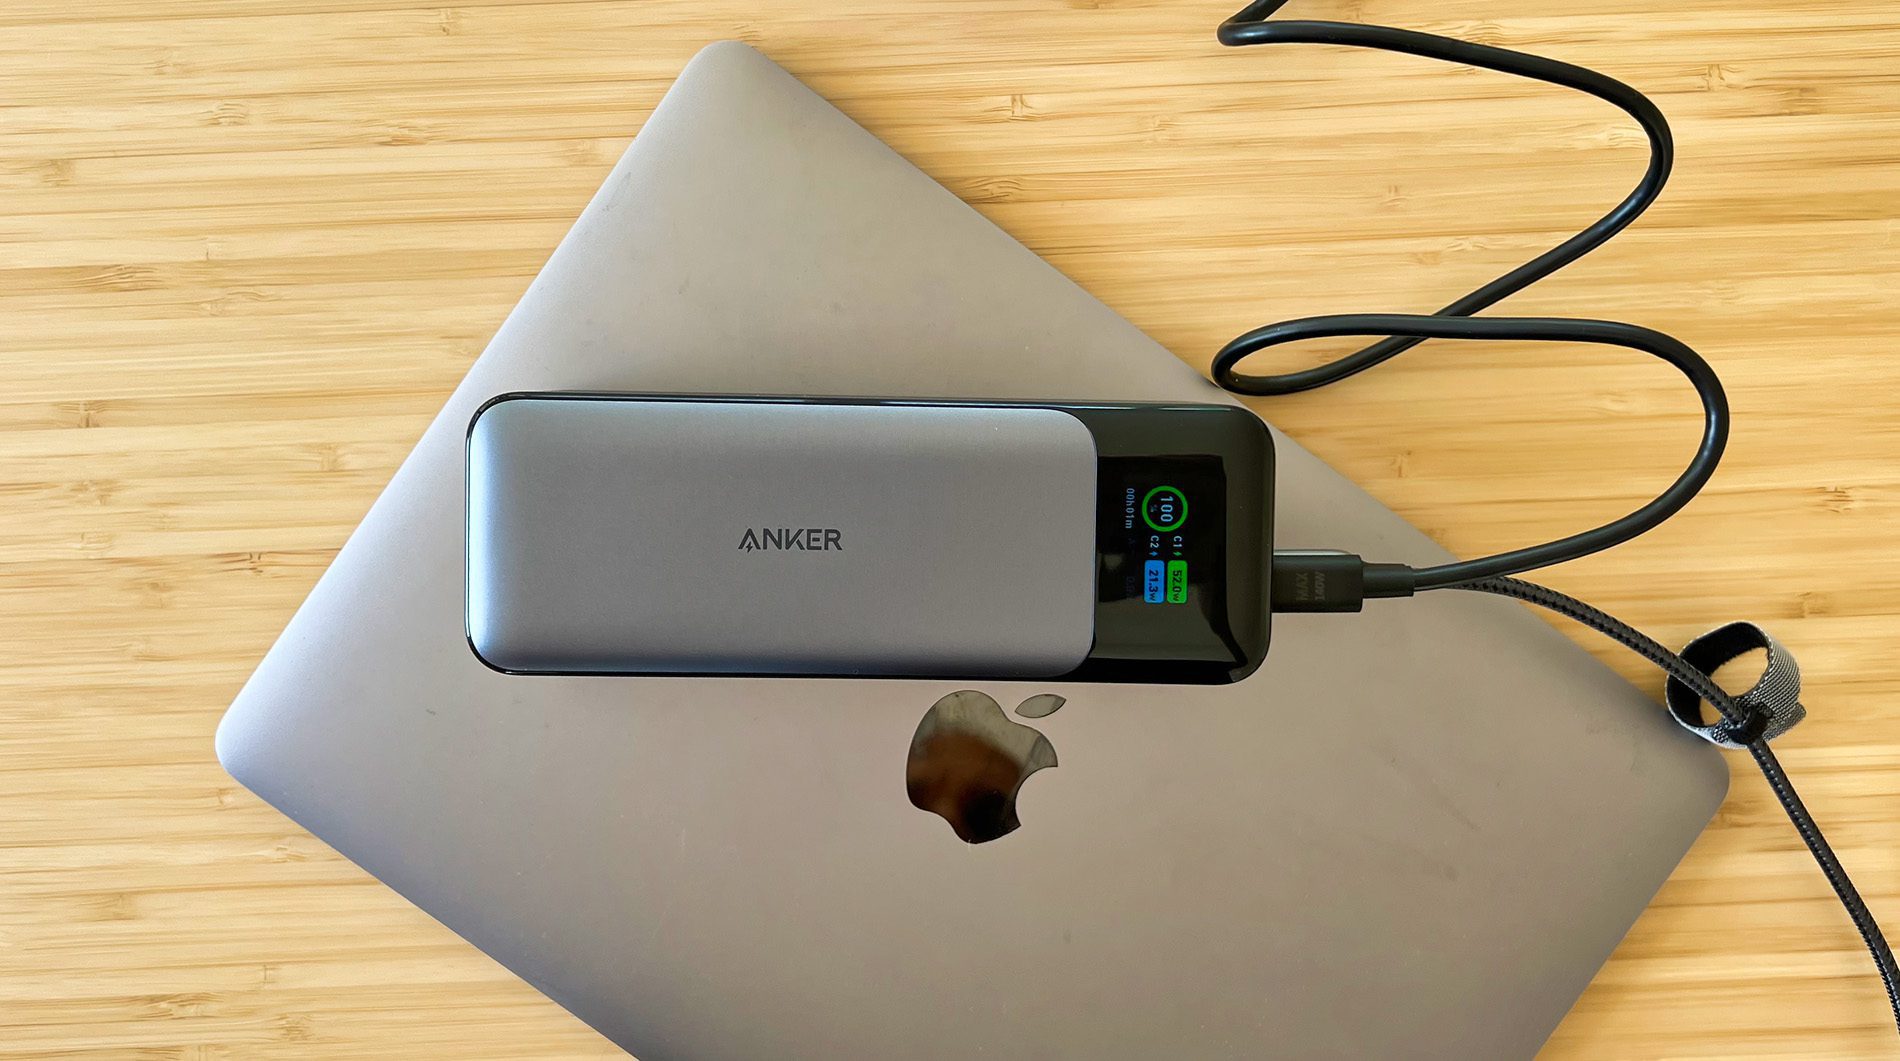 When charging my ancient MacBook, the Anker 737 24K PowerCore Powerbank got really bored, because the Mac simply requires very little power to charge.